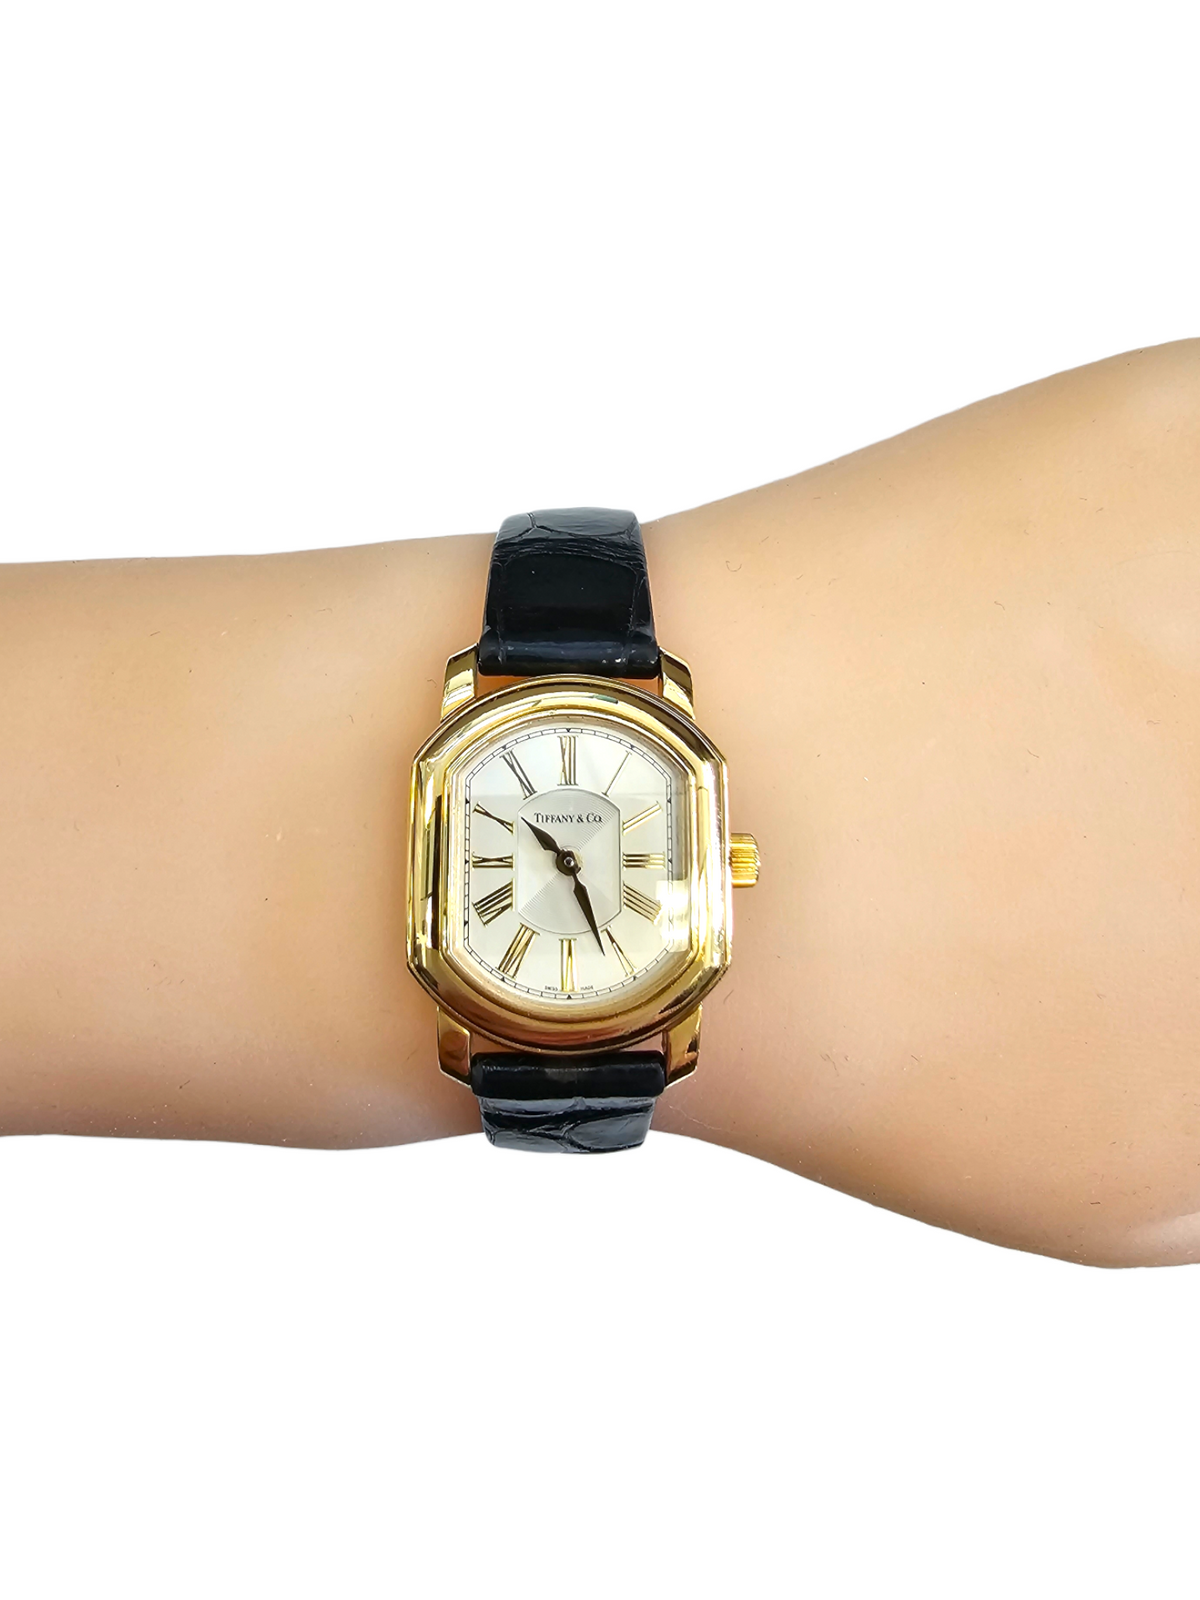 Tiffany & Co Rare Vintage 18kt Yellow Gold Ladies Watch